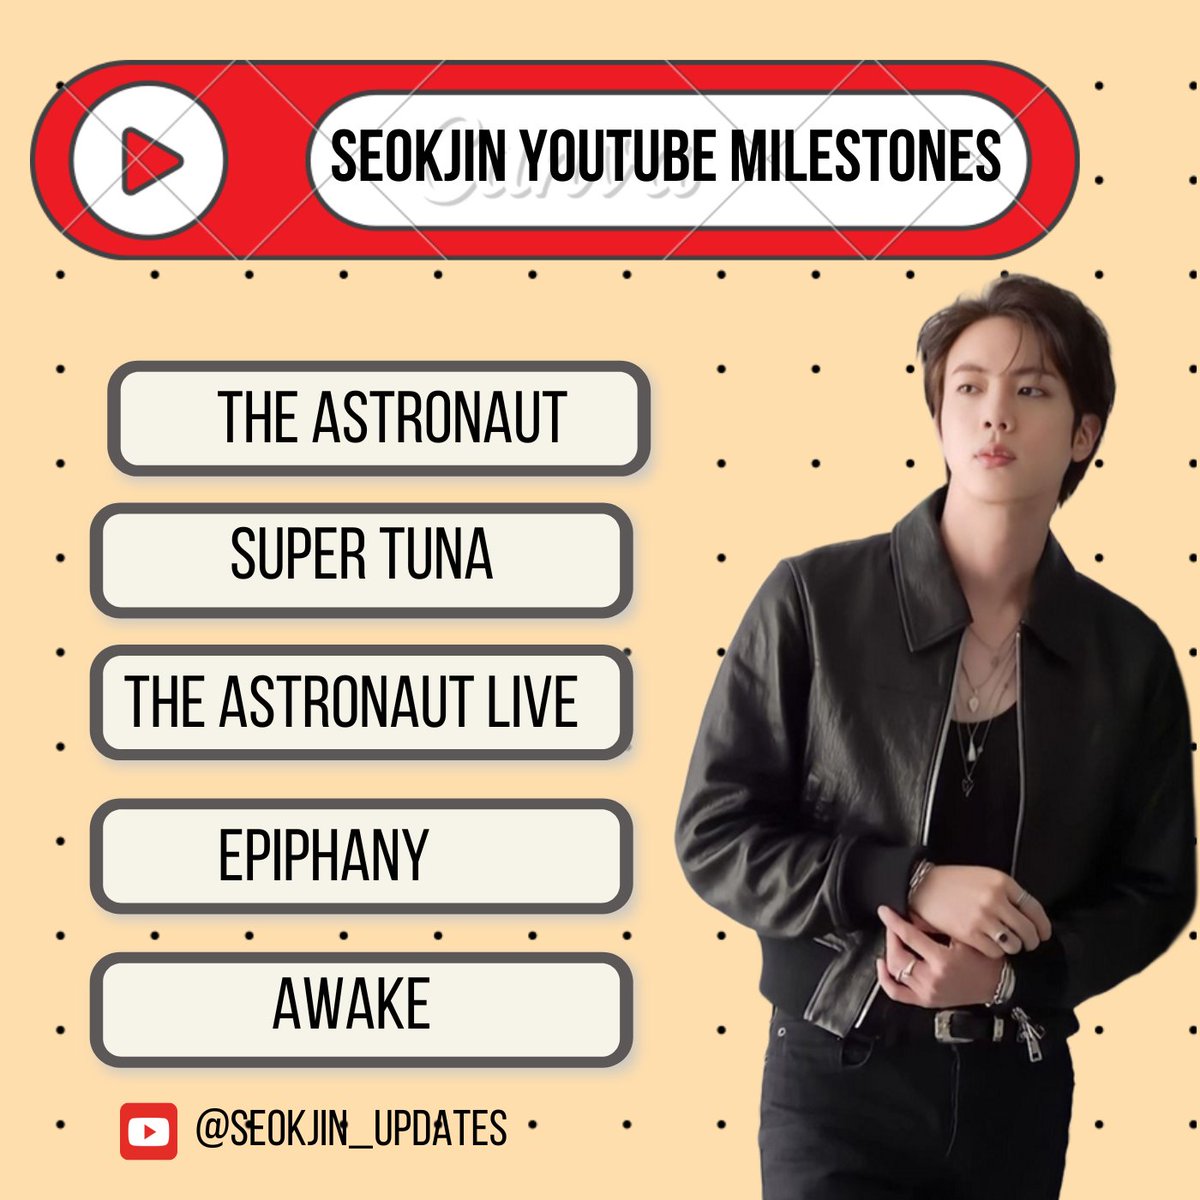 Jin's MVs are soaring high! 🚀 The Astronaut: 812,097🔜110M 🐟 Super Tuna: 31,151🔜95M 🚀 The Astronaut Live: 818,796🔜29M 🩷 Epiphany: 768,245🔜127M 🪟 Awake: 885,810🔜17M Keep Streaming and Soaring with Jin shorturl.at/etxzD shorturl.at/atFT2…